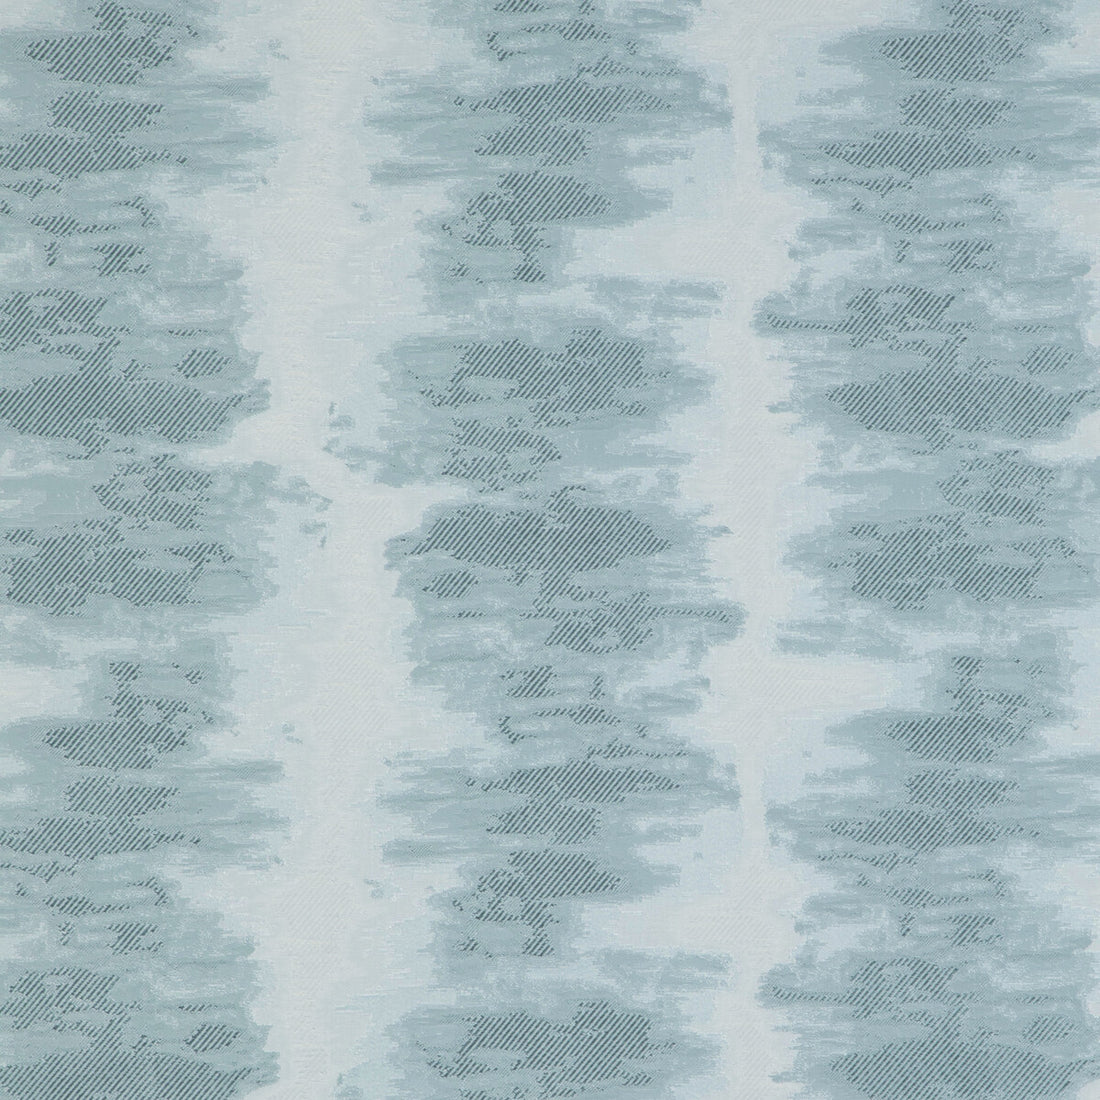 Ethereal Beauty fabric in spa color - pattern 5005.15.0 - by Kravet Design in the Candice Olson collection